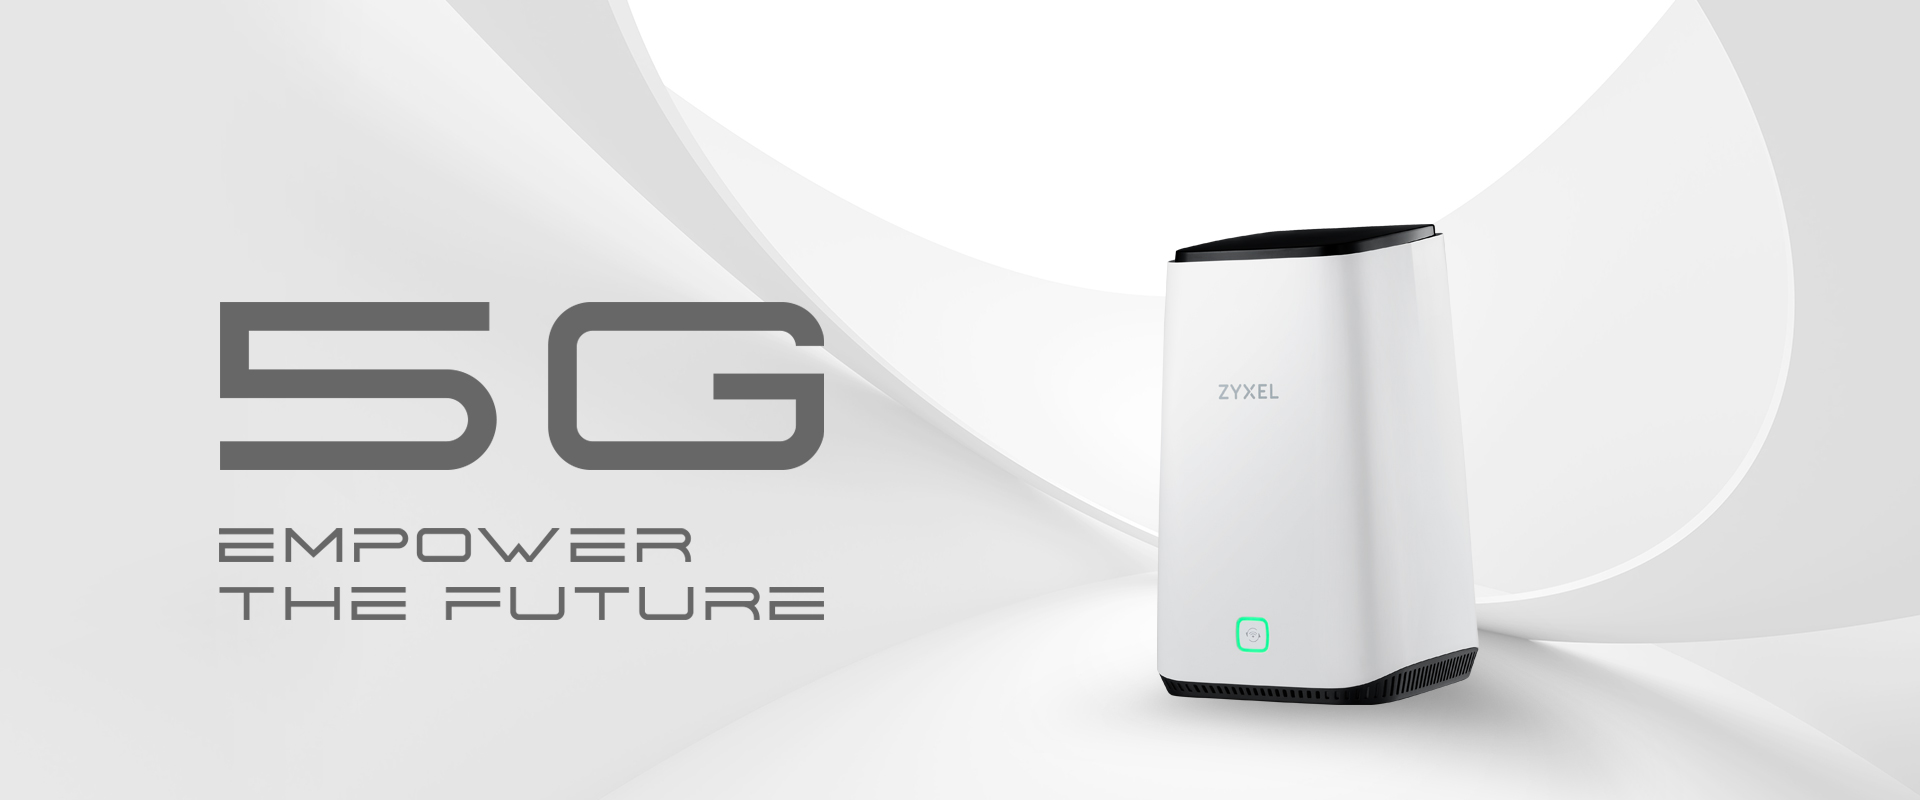 Zyxel FWA-510-EU0102F AX3600 5G NR Indoor Router